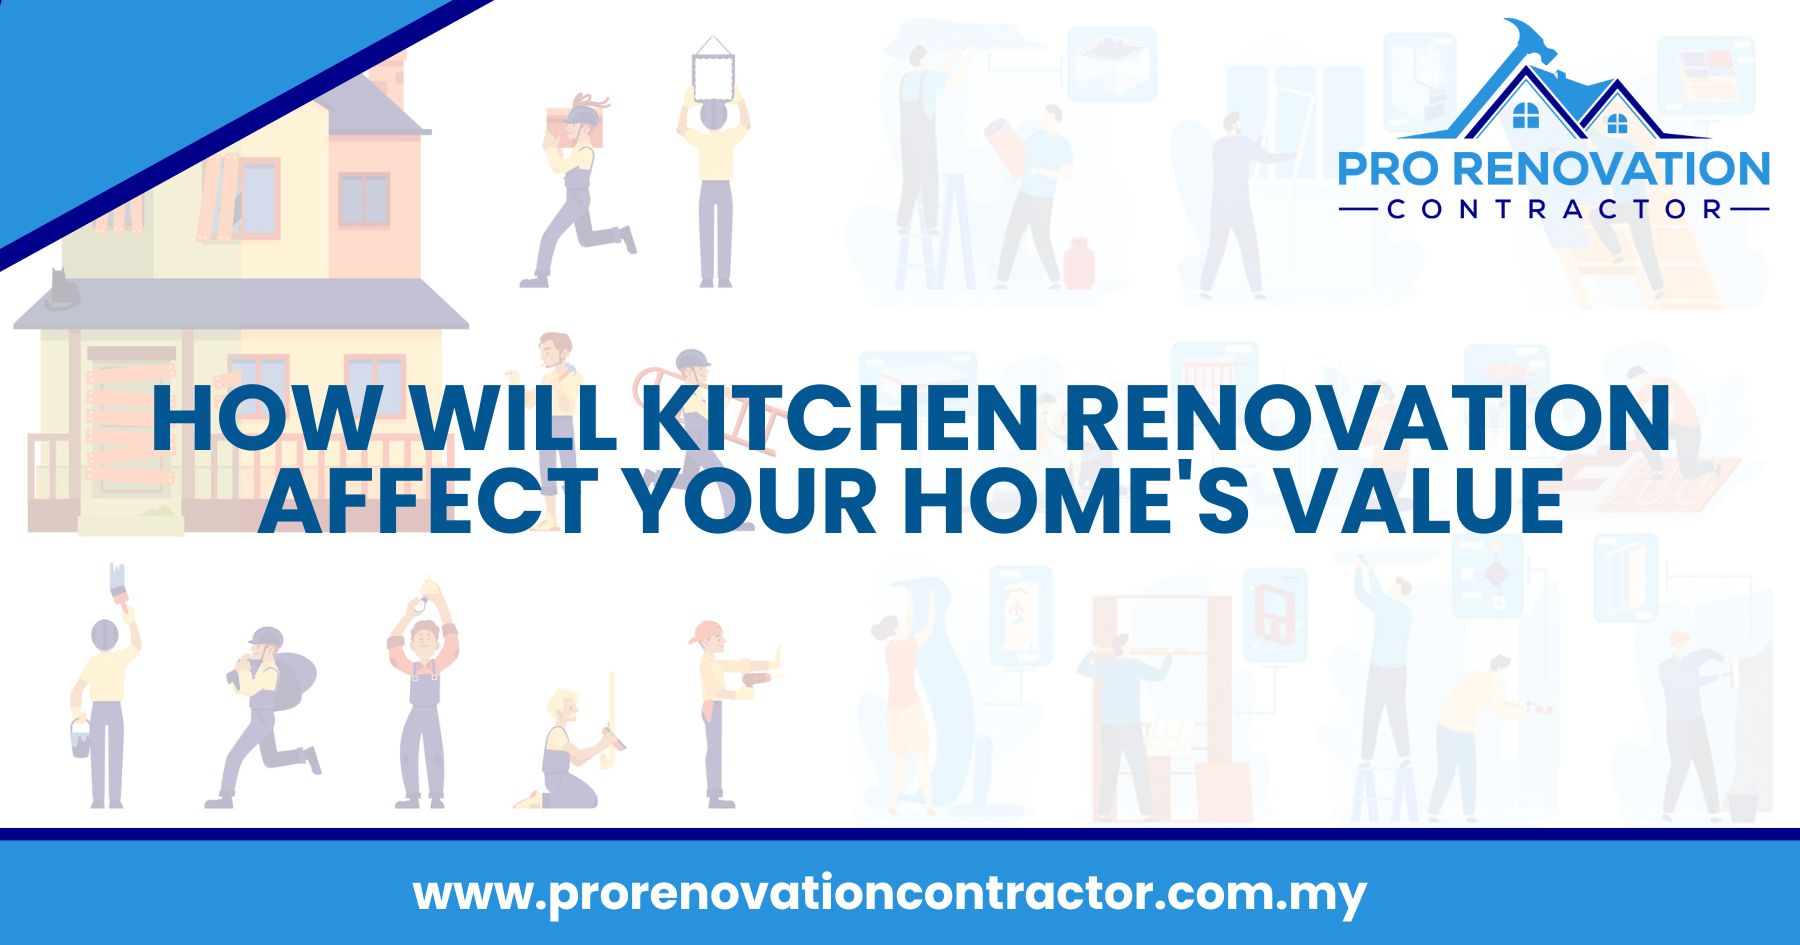 How Will Kitchen Renovation Affect Your Home's Value